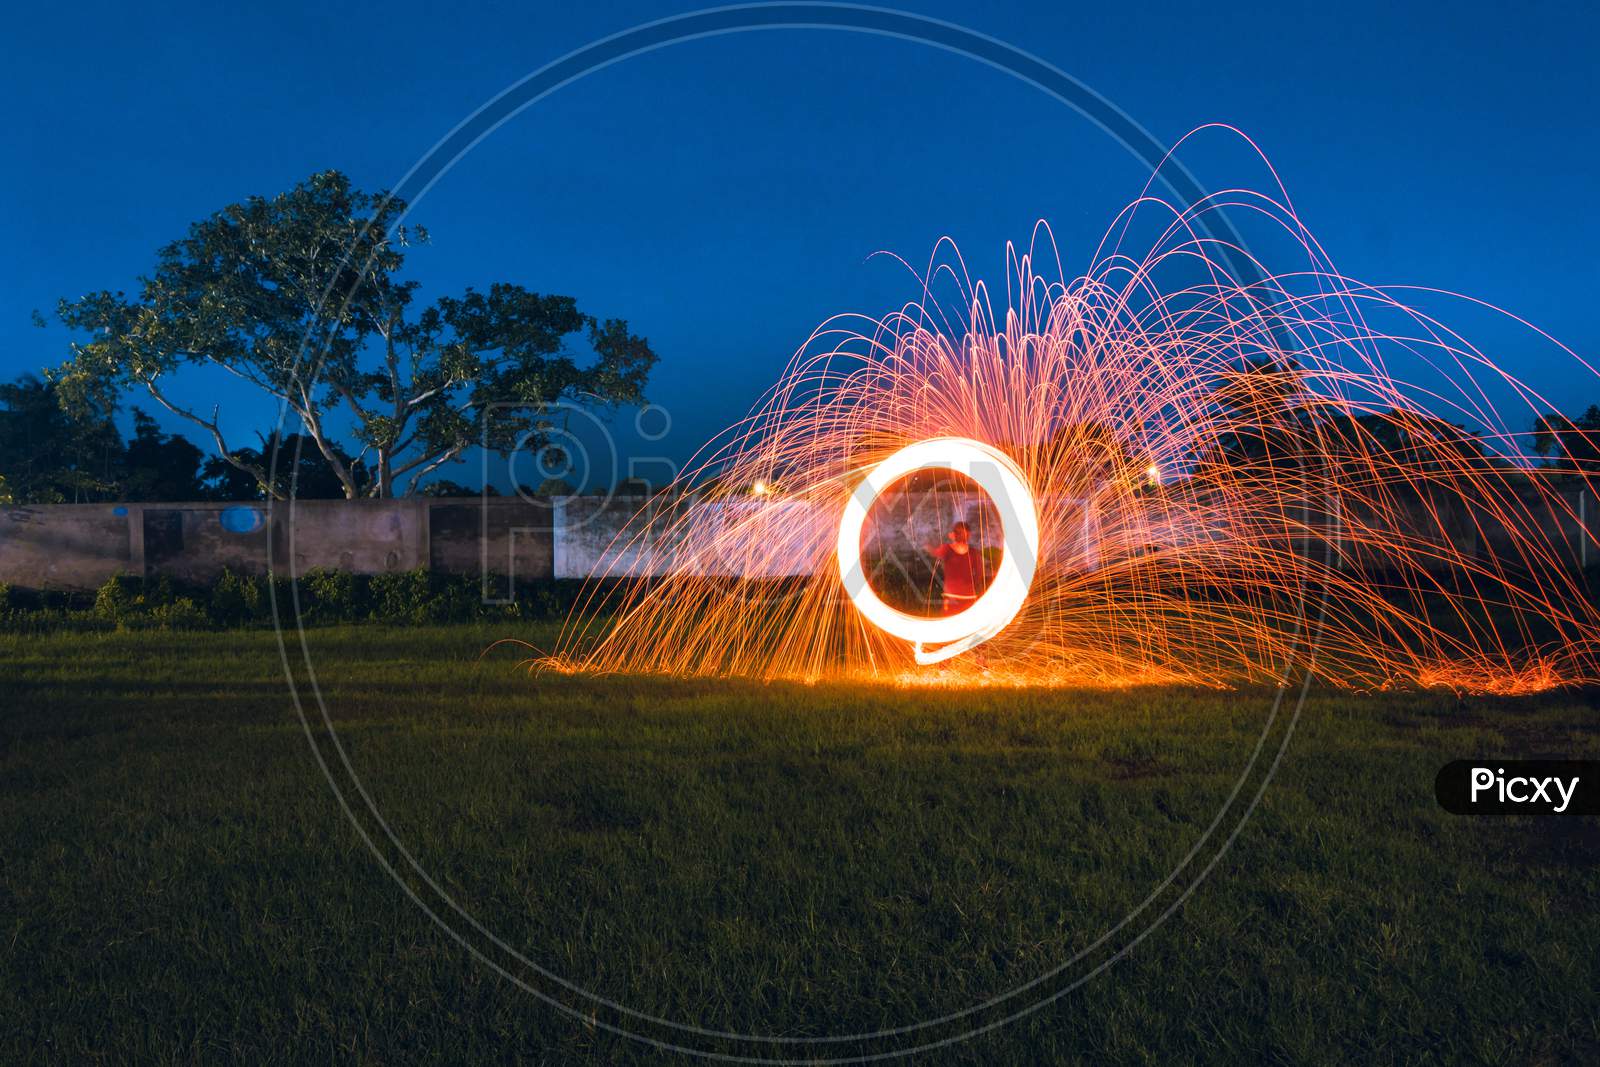 Steel Wool photography in a great frame